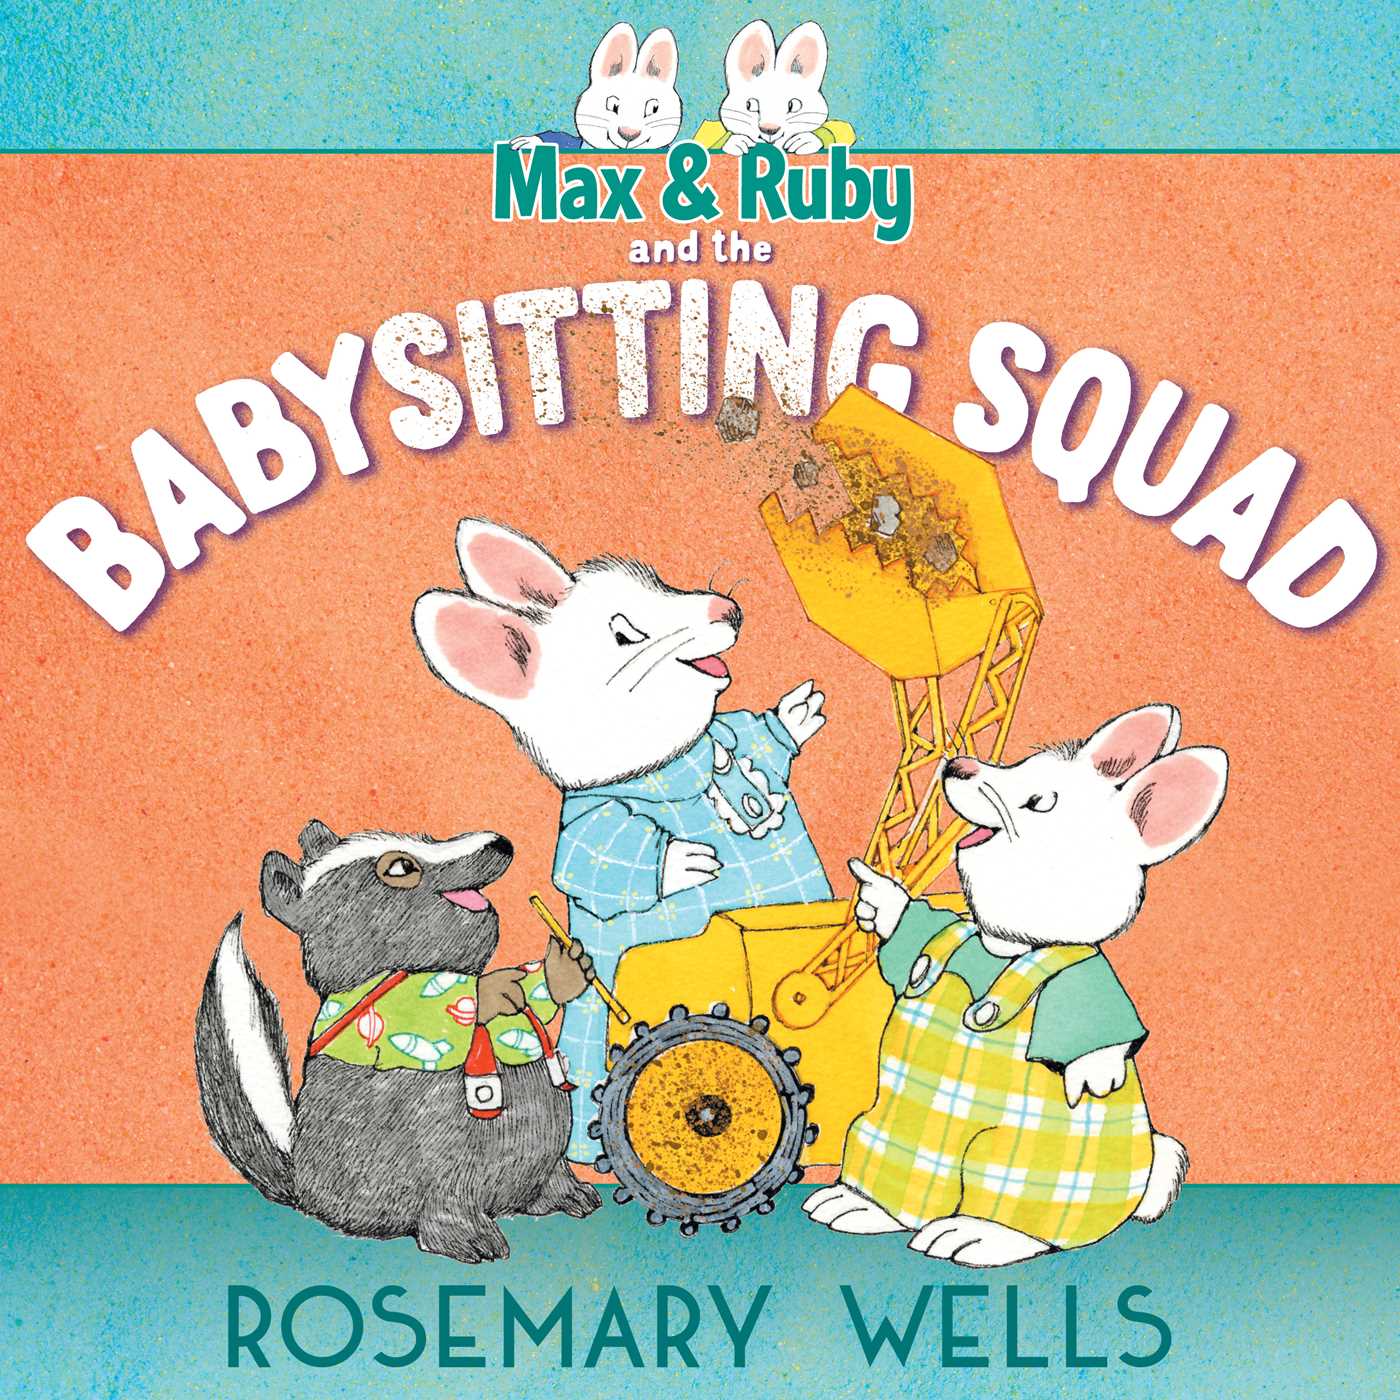 Max & Ruby from Max & Ruby and the Babysitting Squad Cover68